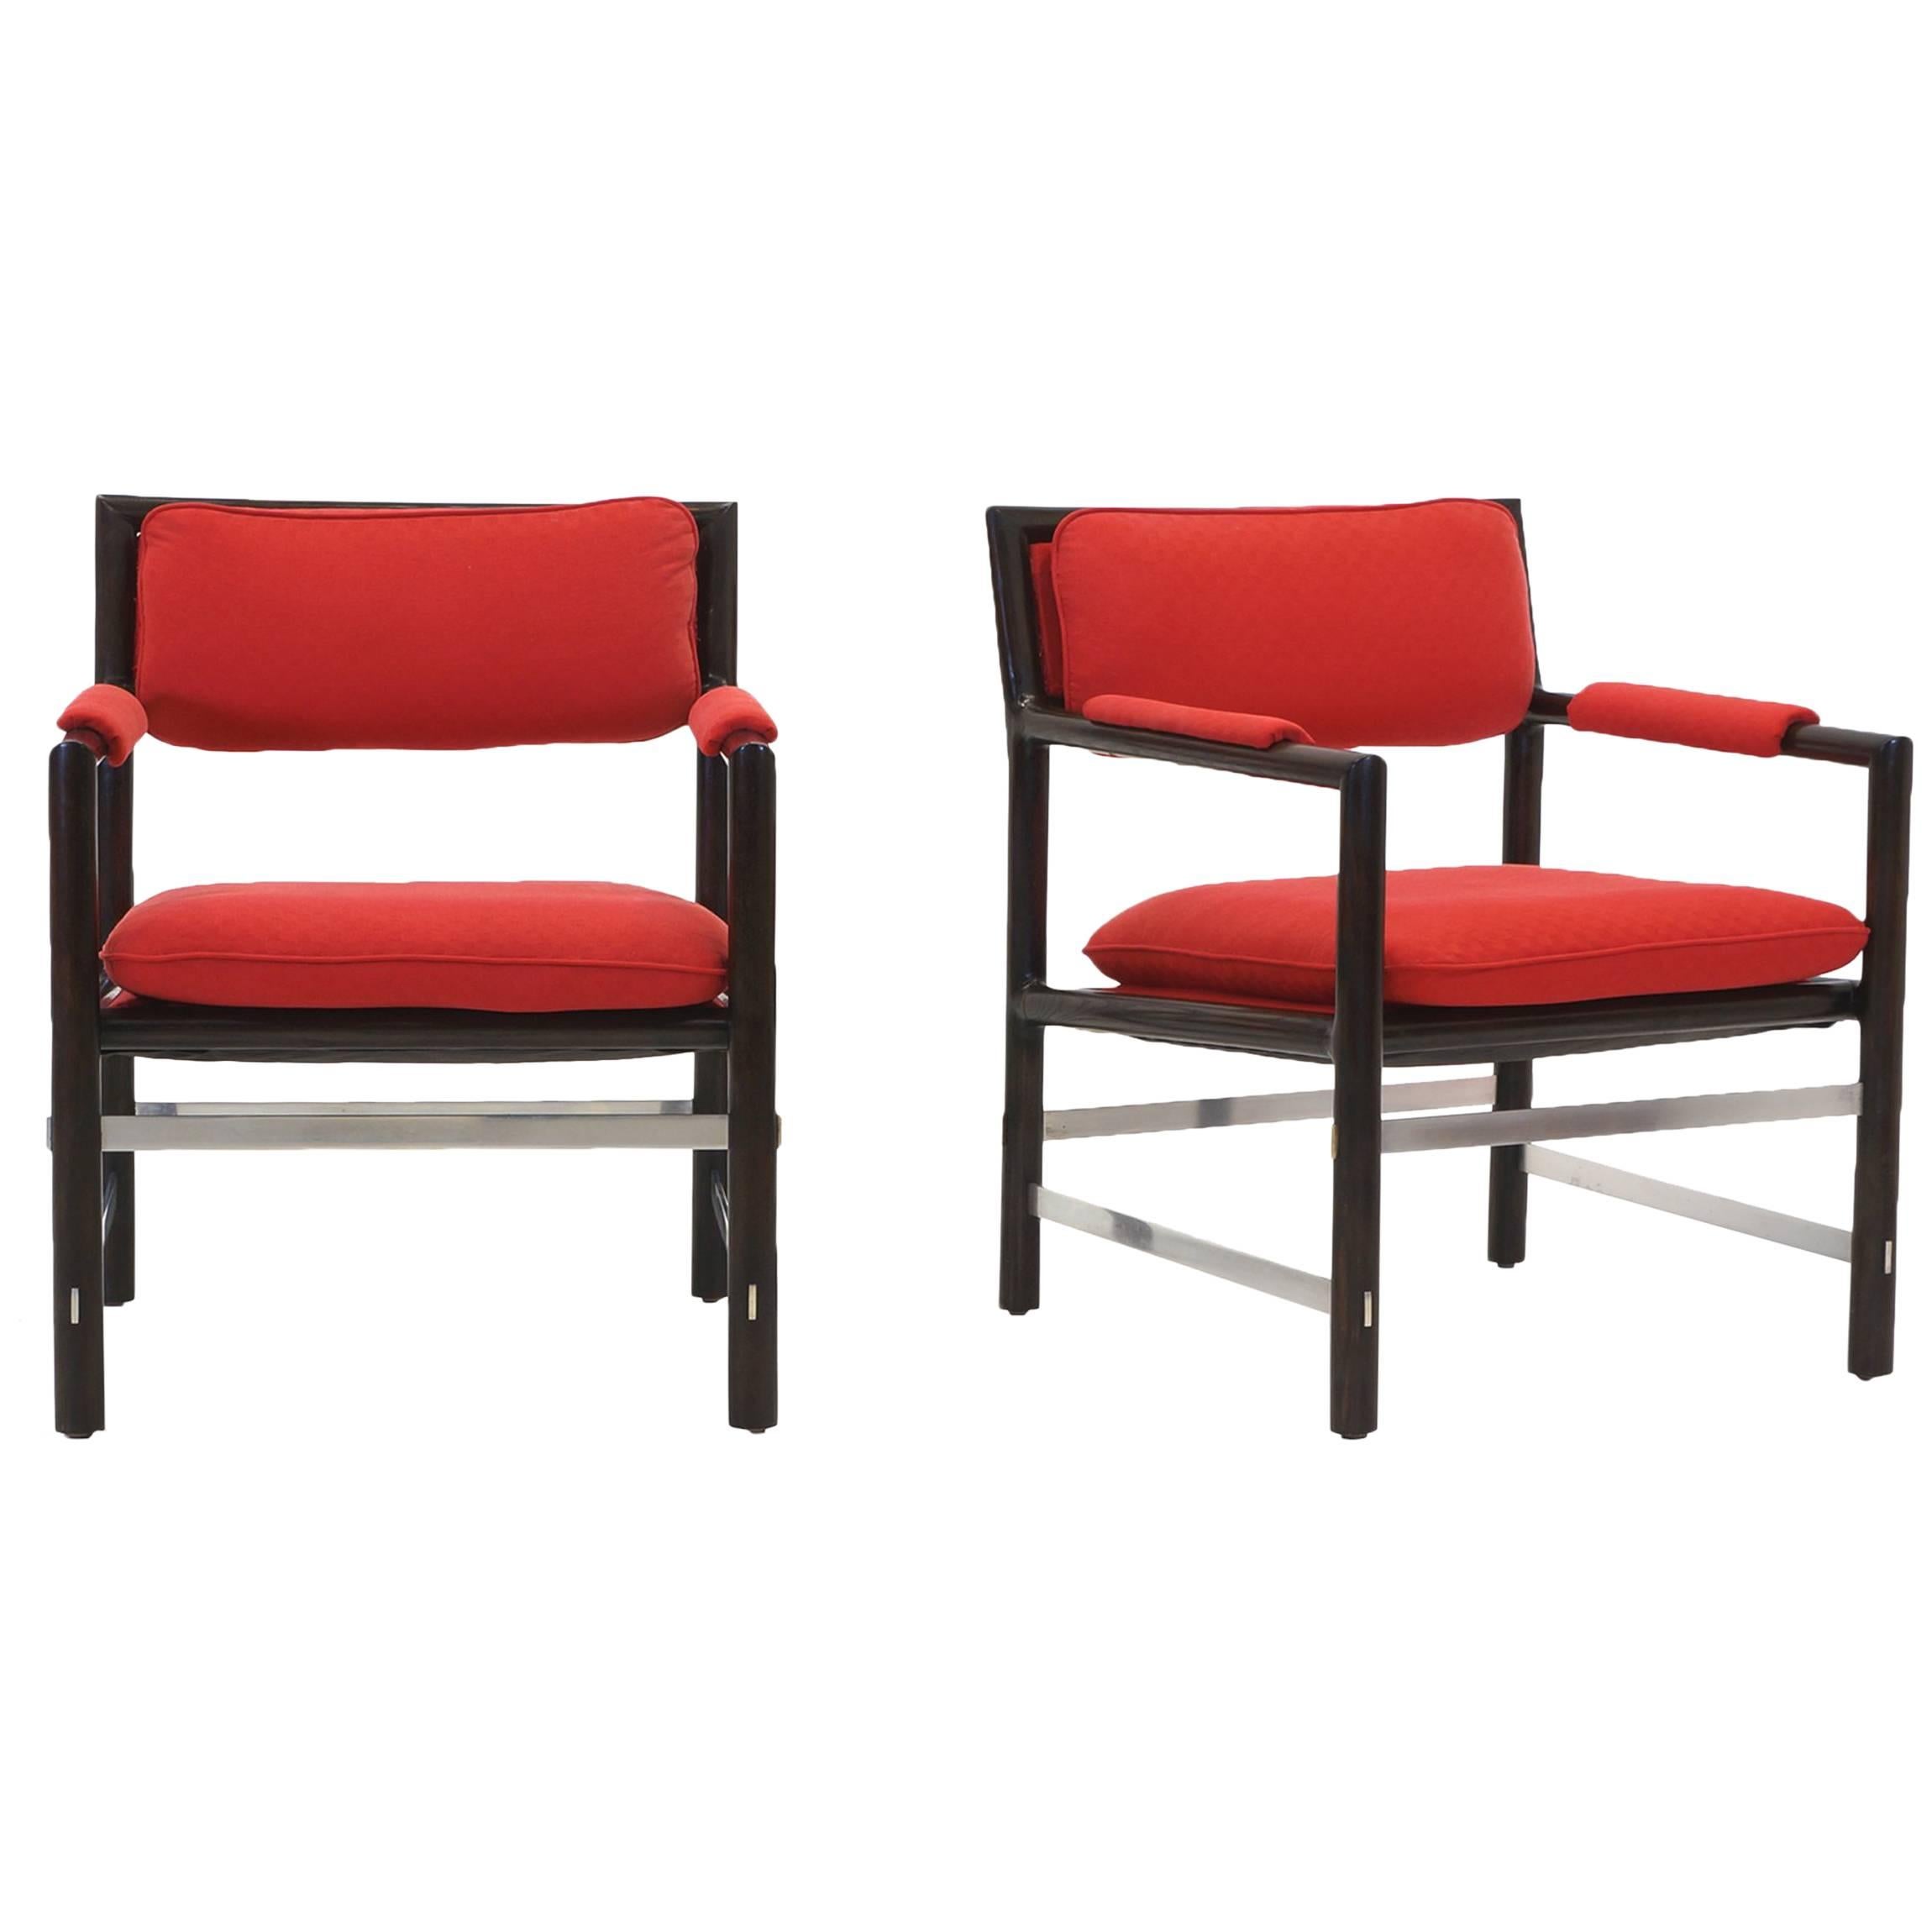 Outstanding Pair of Edward Wormley for Dunbar Chairs